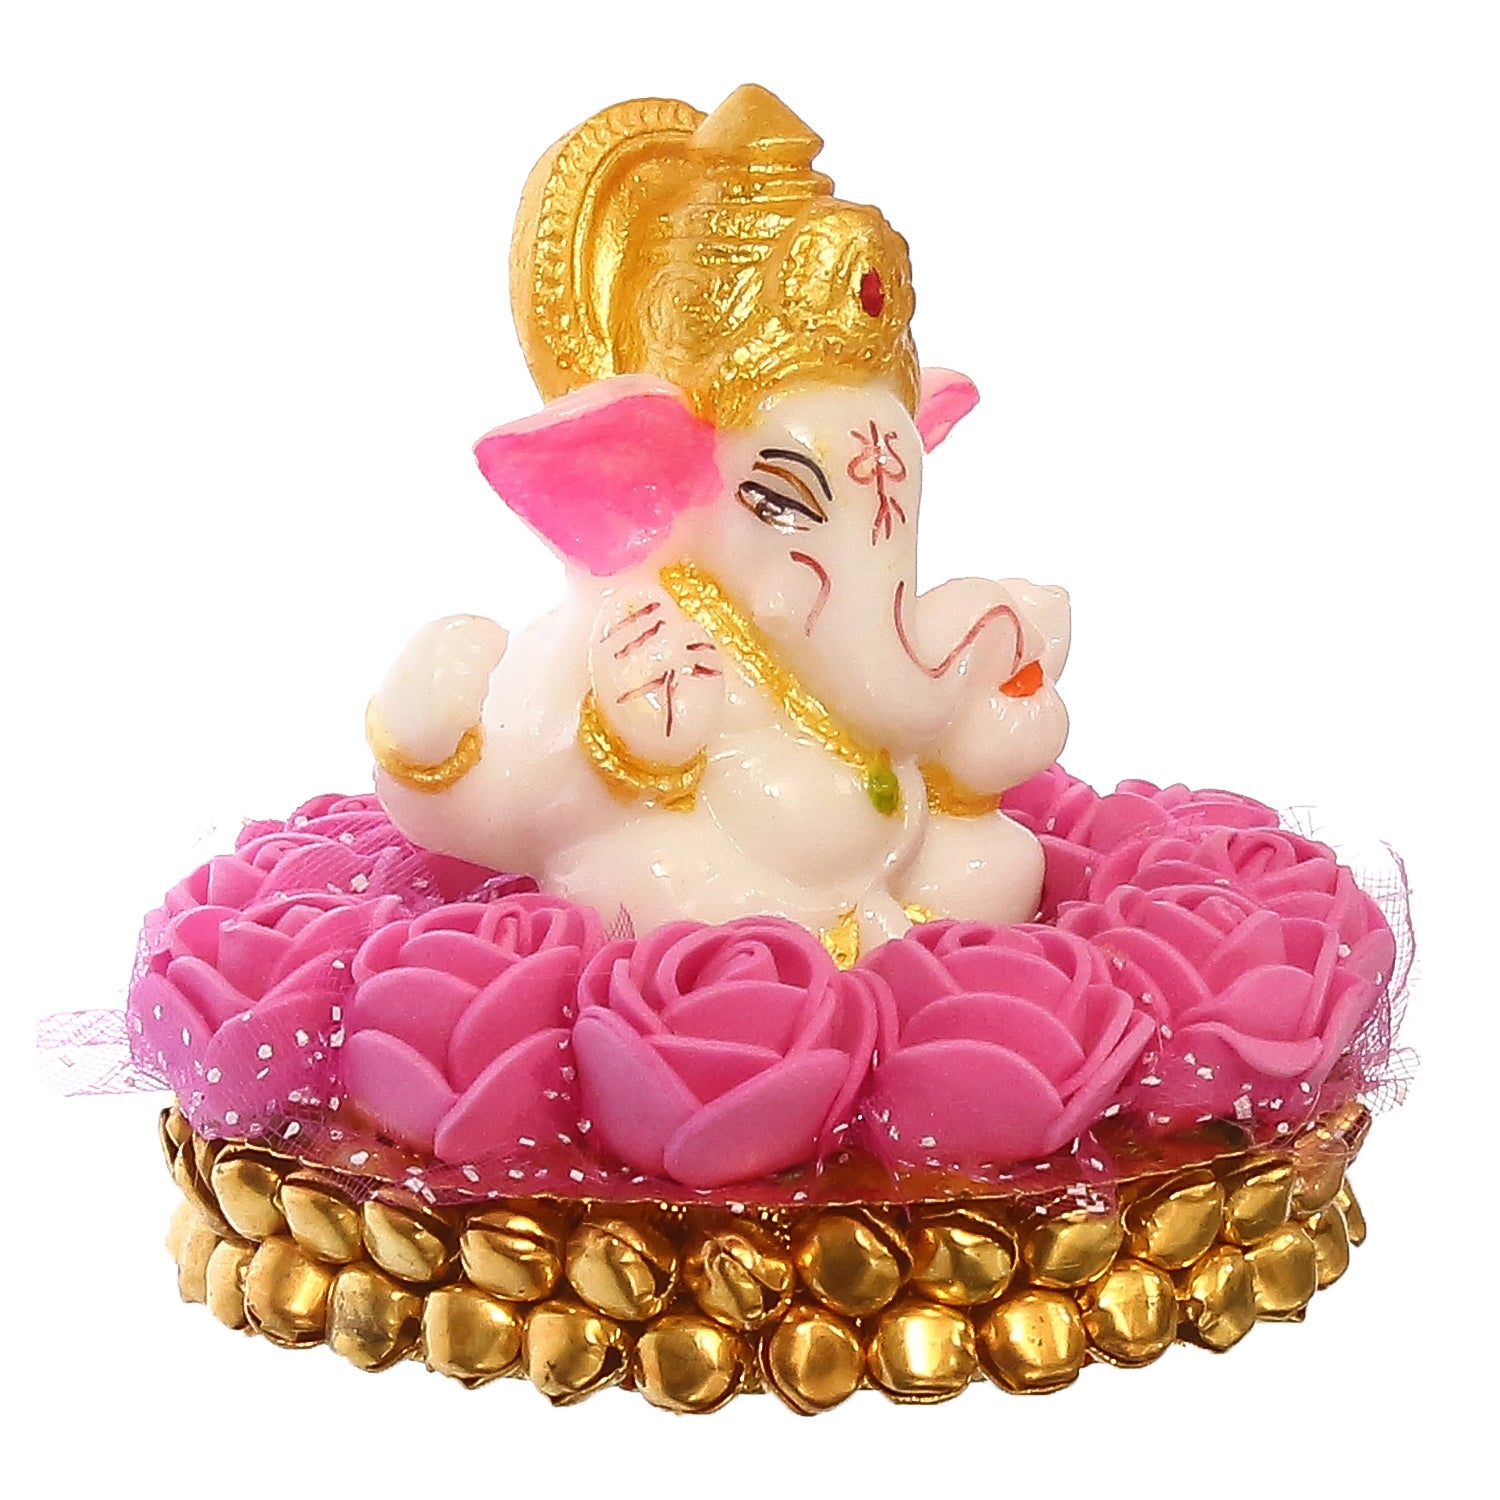 Polyresin Lord Ganesha Idol on Decorative Handcrafted Plate with Pink Flowers 4